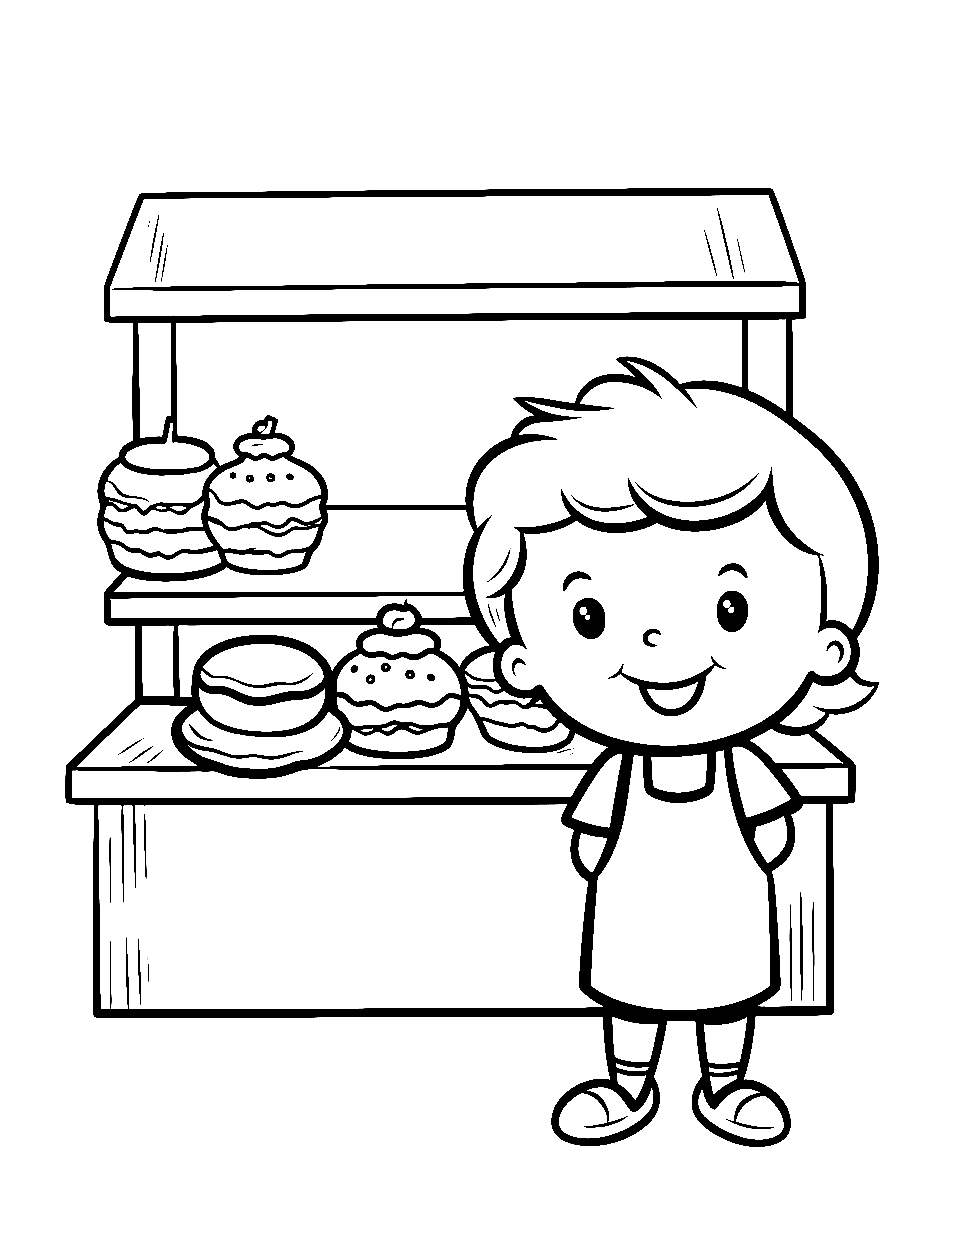 Kid's Snack Bar Food Coloring Page - A kid and his snacks with a snack stand.